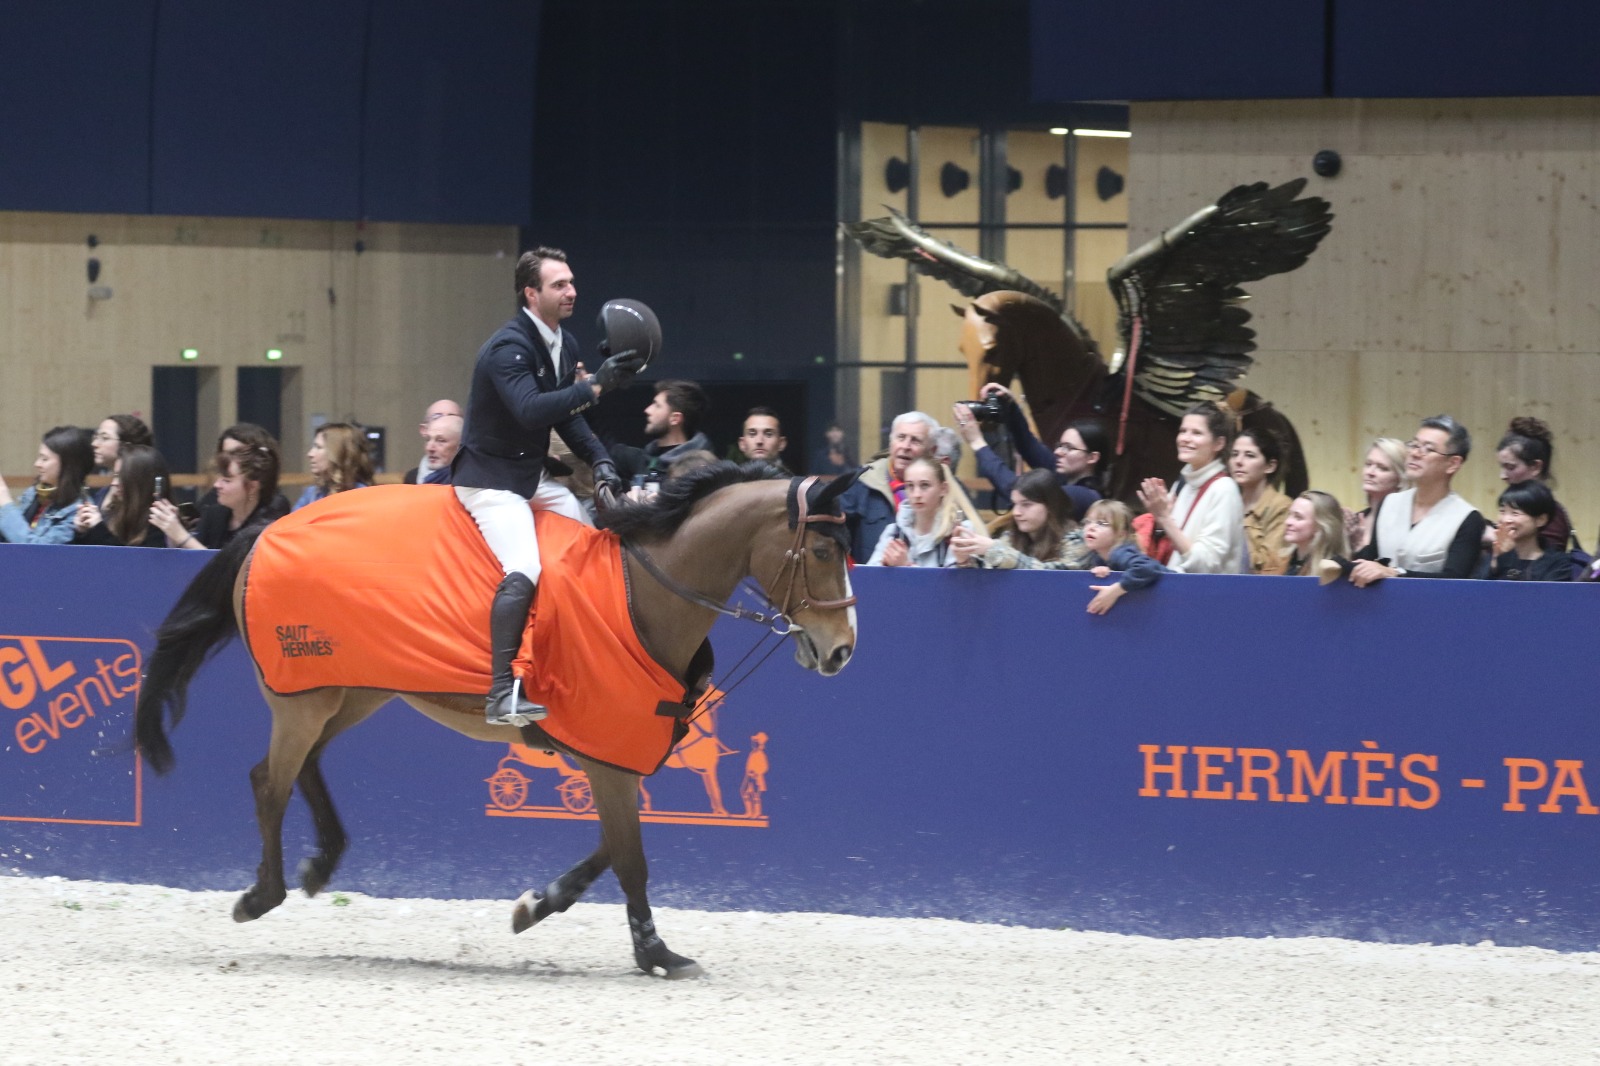 French go faster and fastest at Saut Hermès